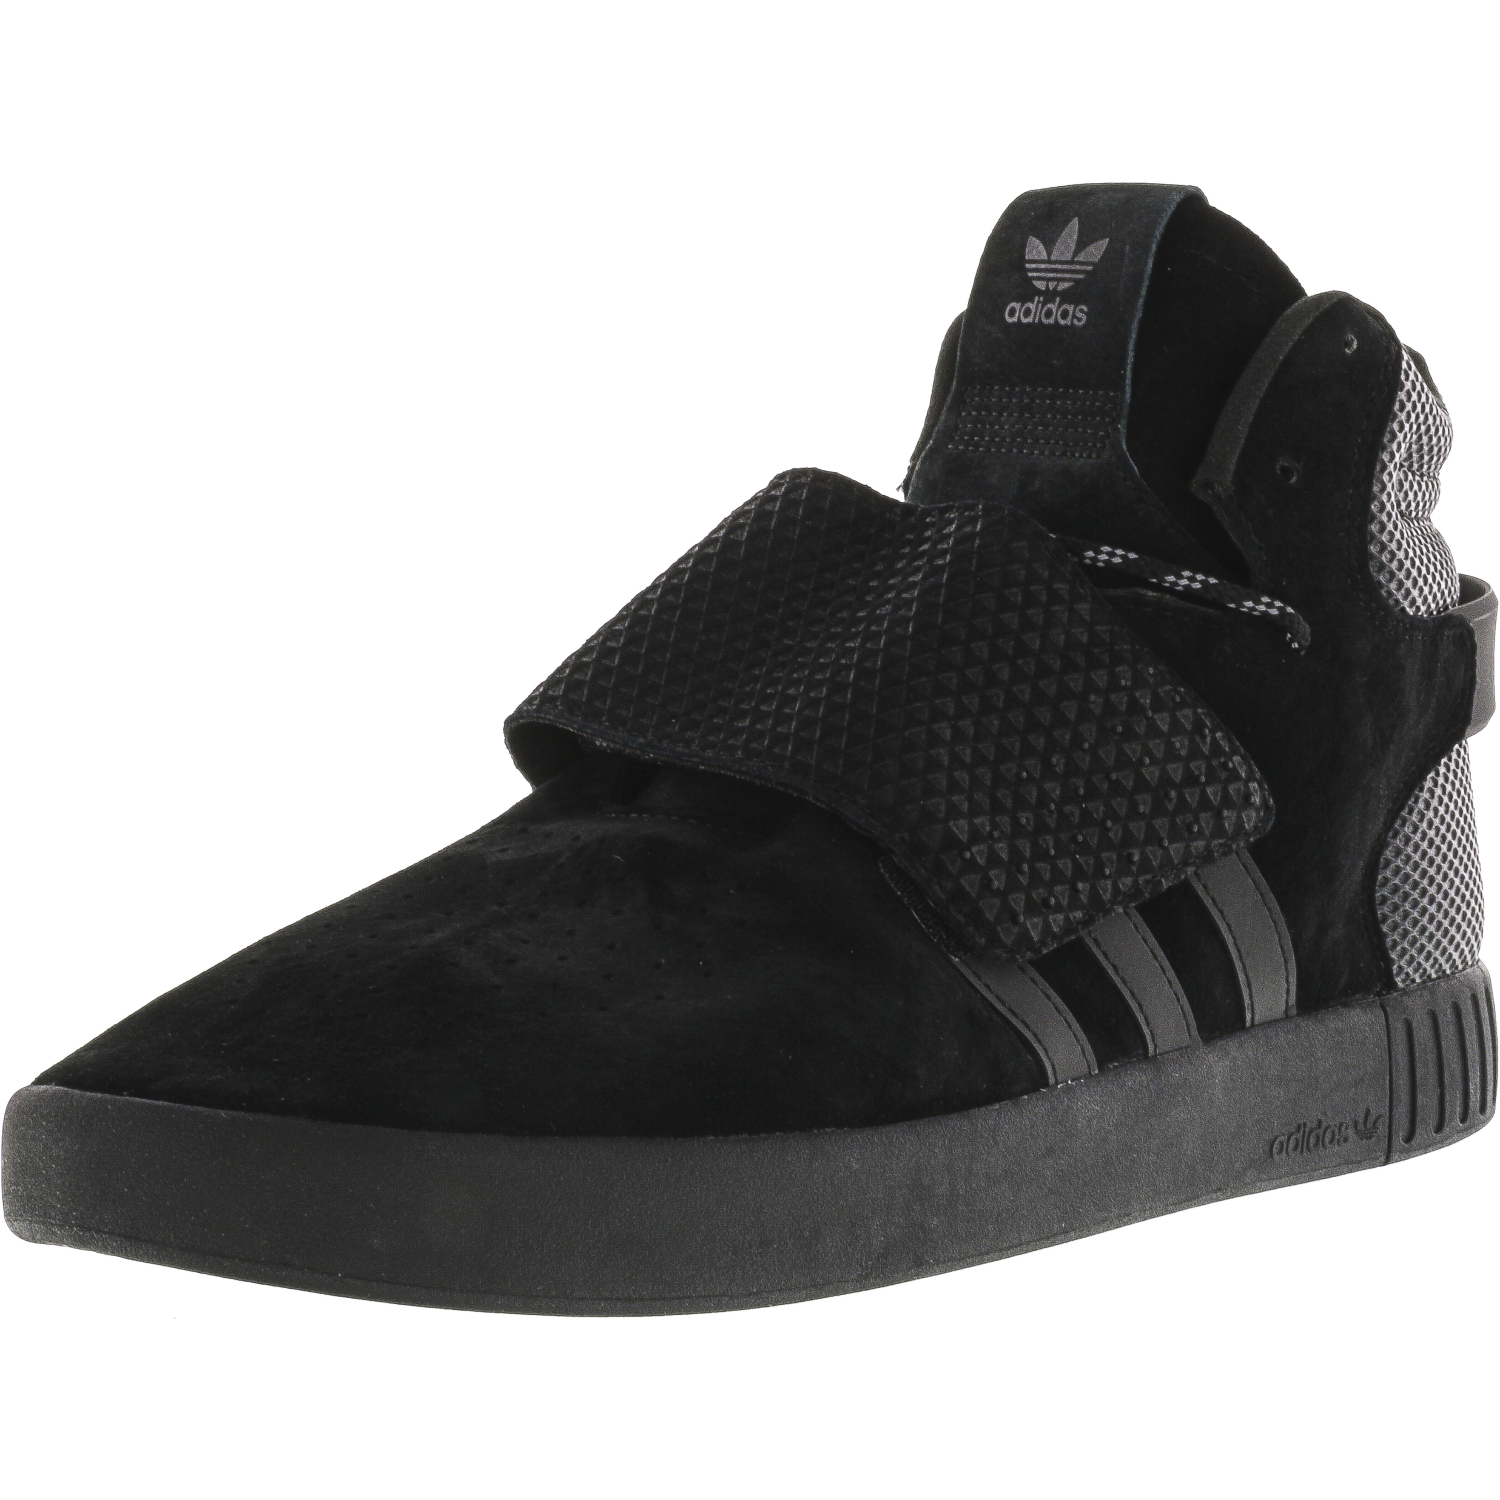 Buy > adidas high top strap > in stock